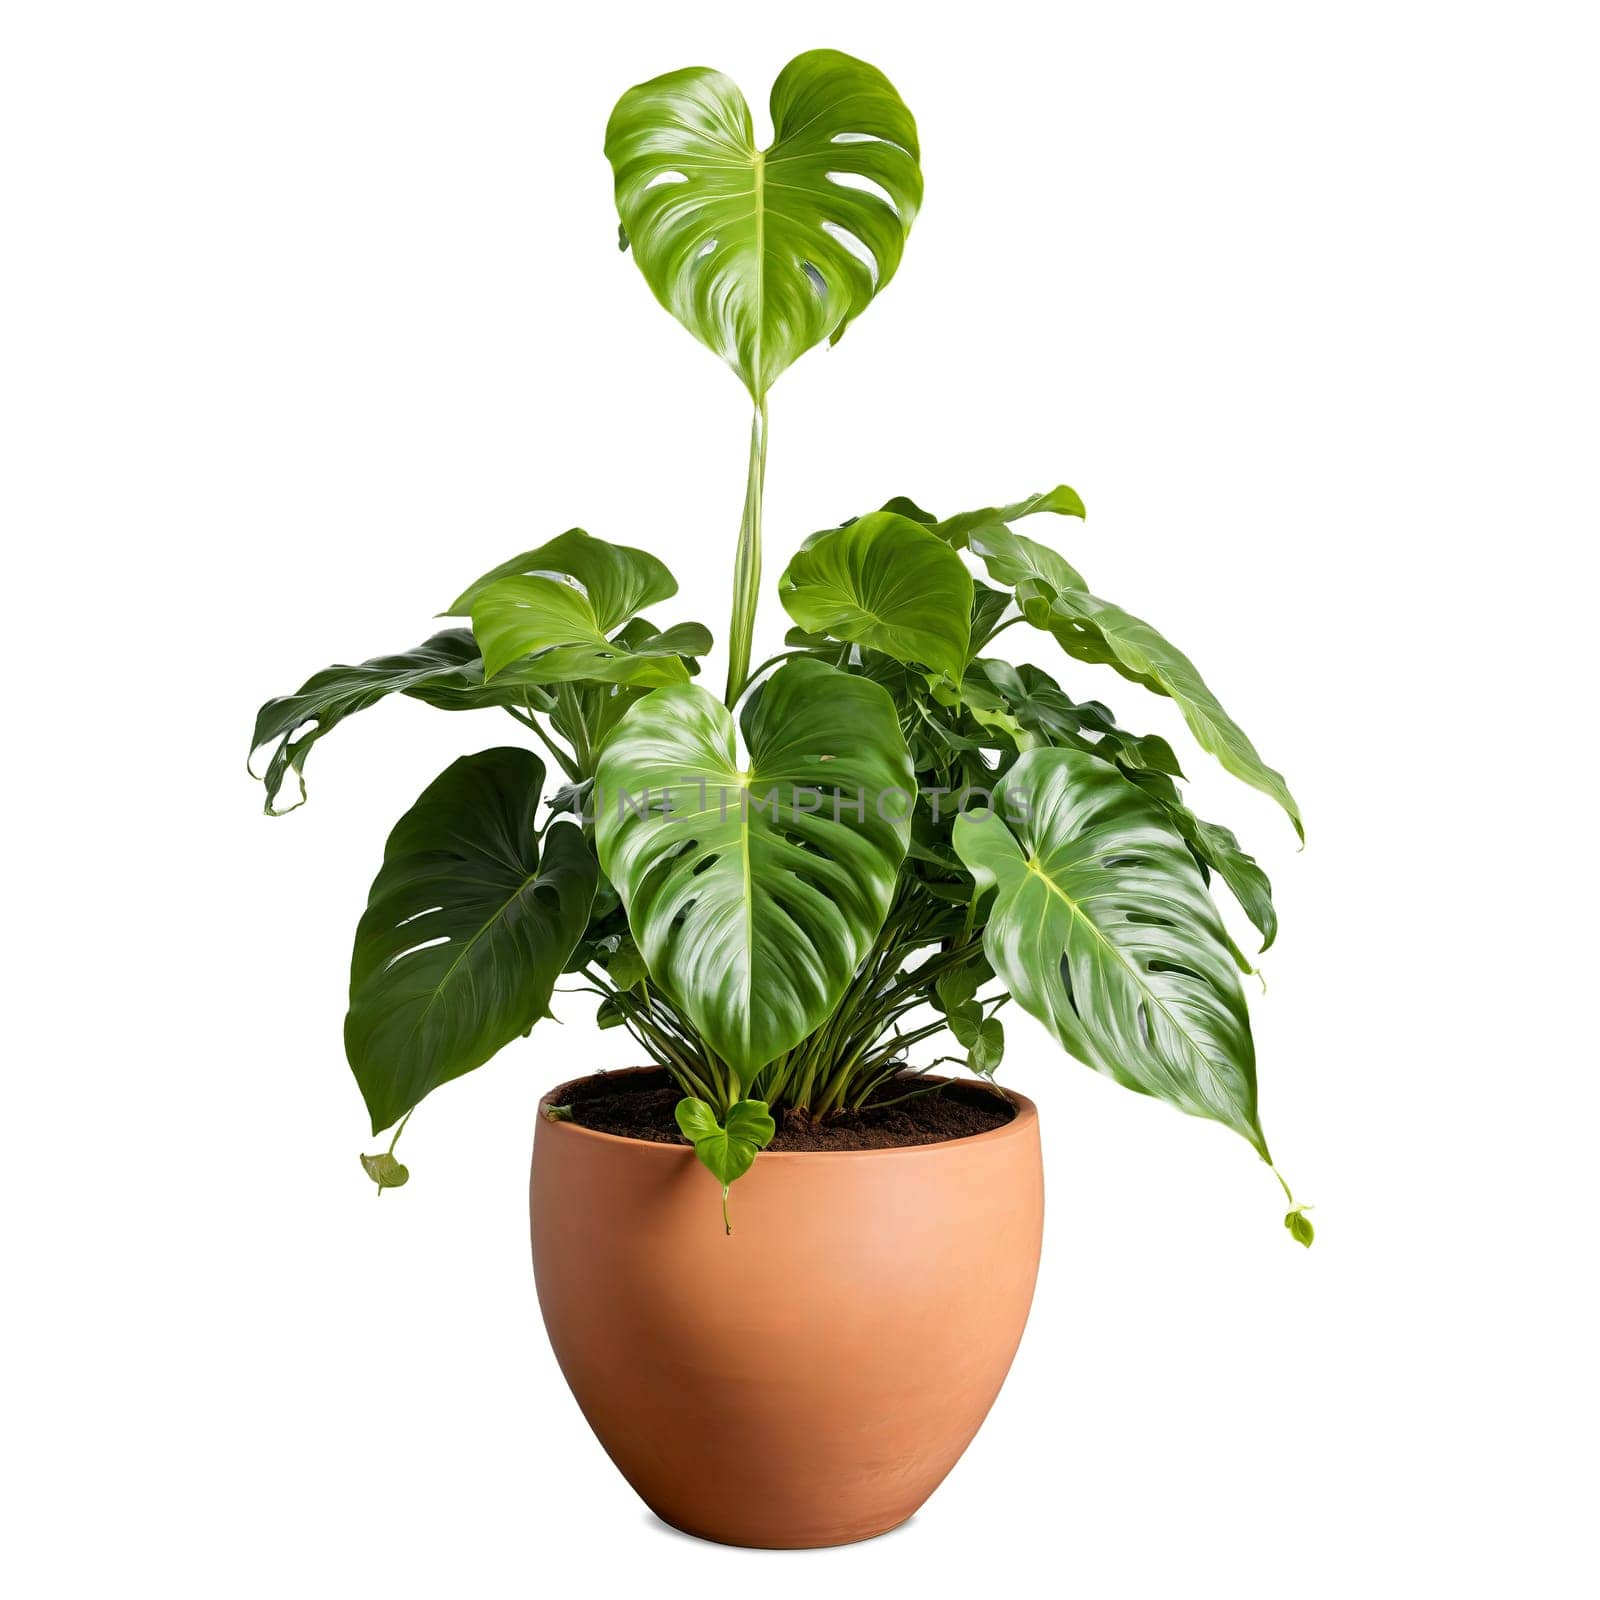 Philodendron Heartleaf lush heart shaped green leaves pouring from a floating terracotta pot surrounded by by panophotograph